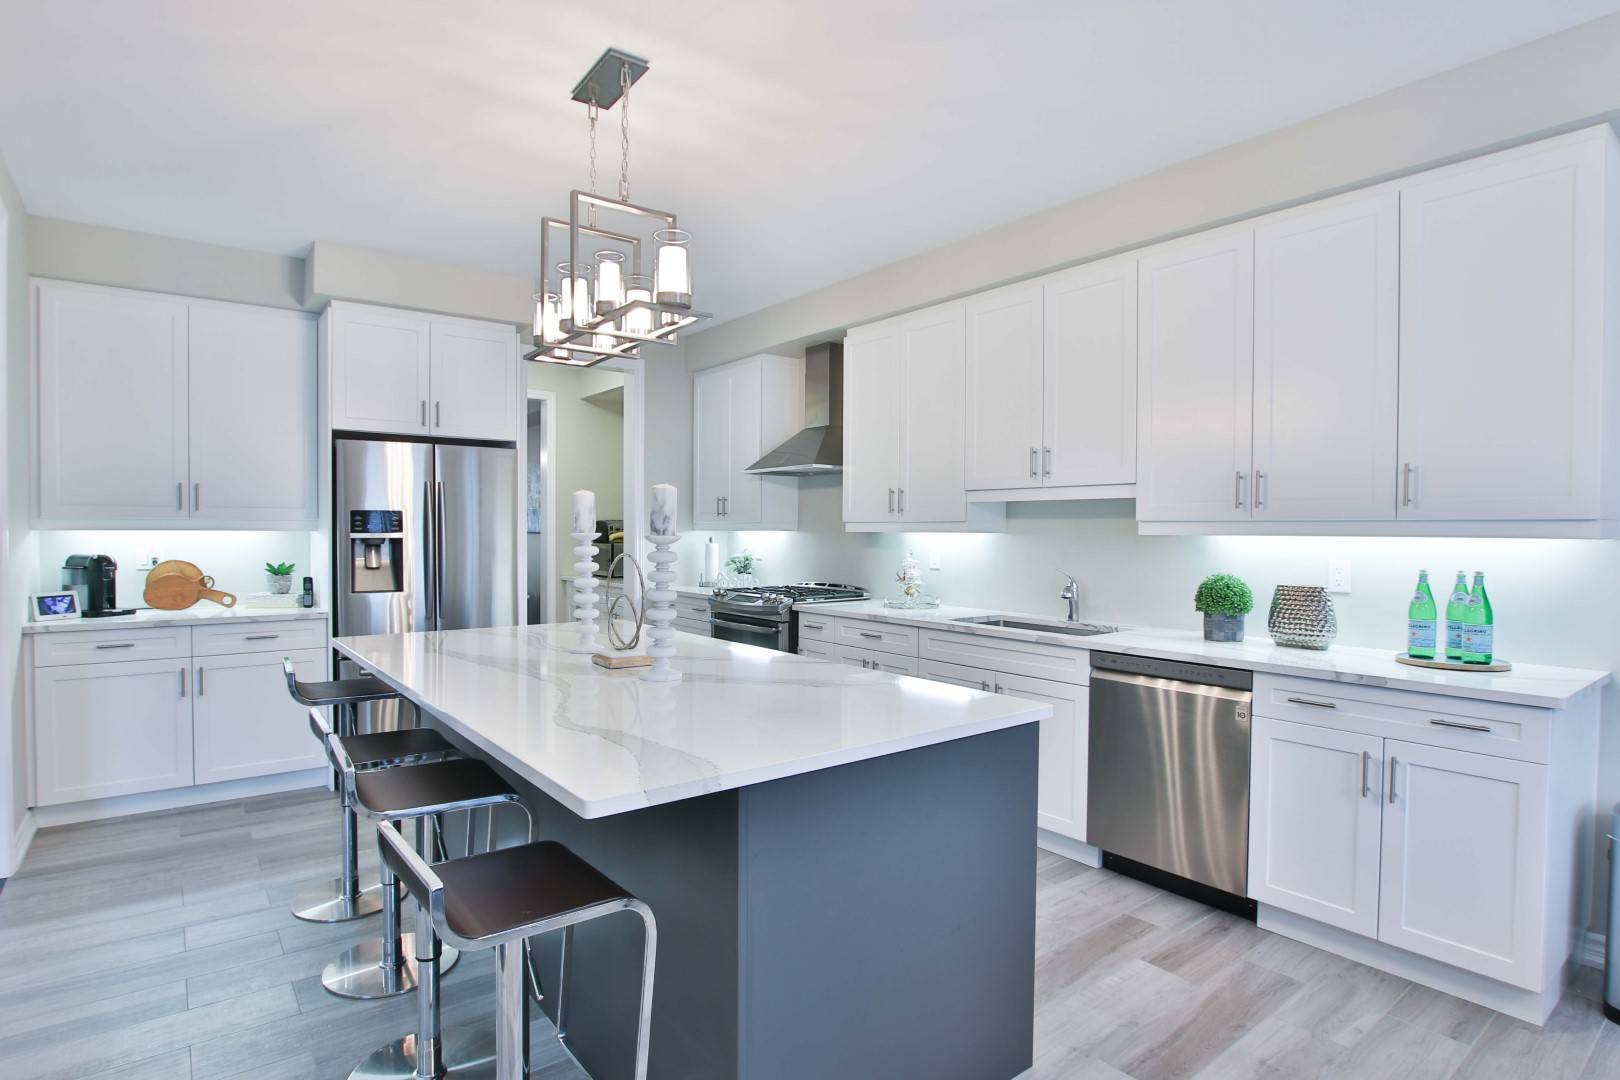 White Cabinets with Metallic Chandeliers